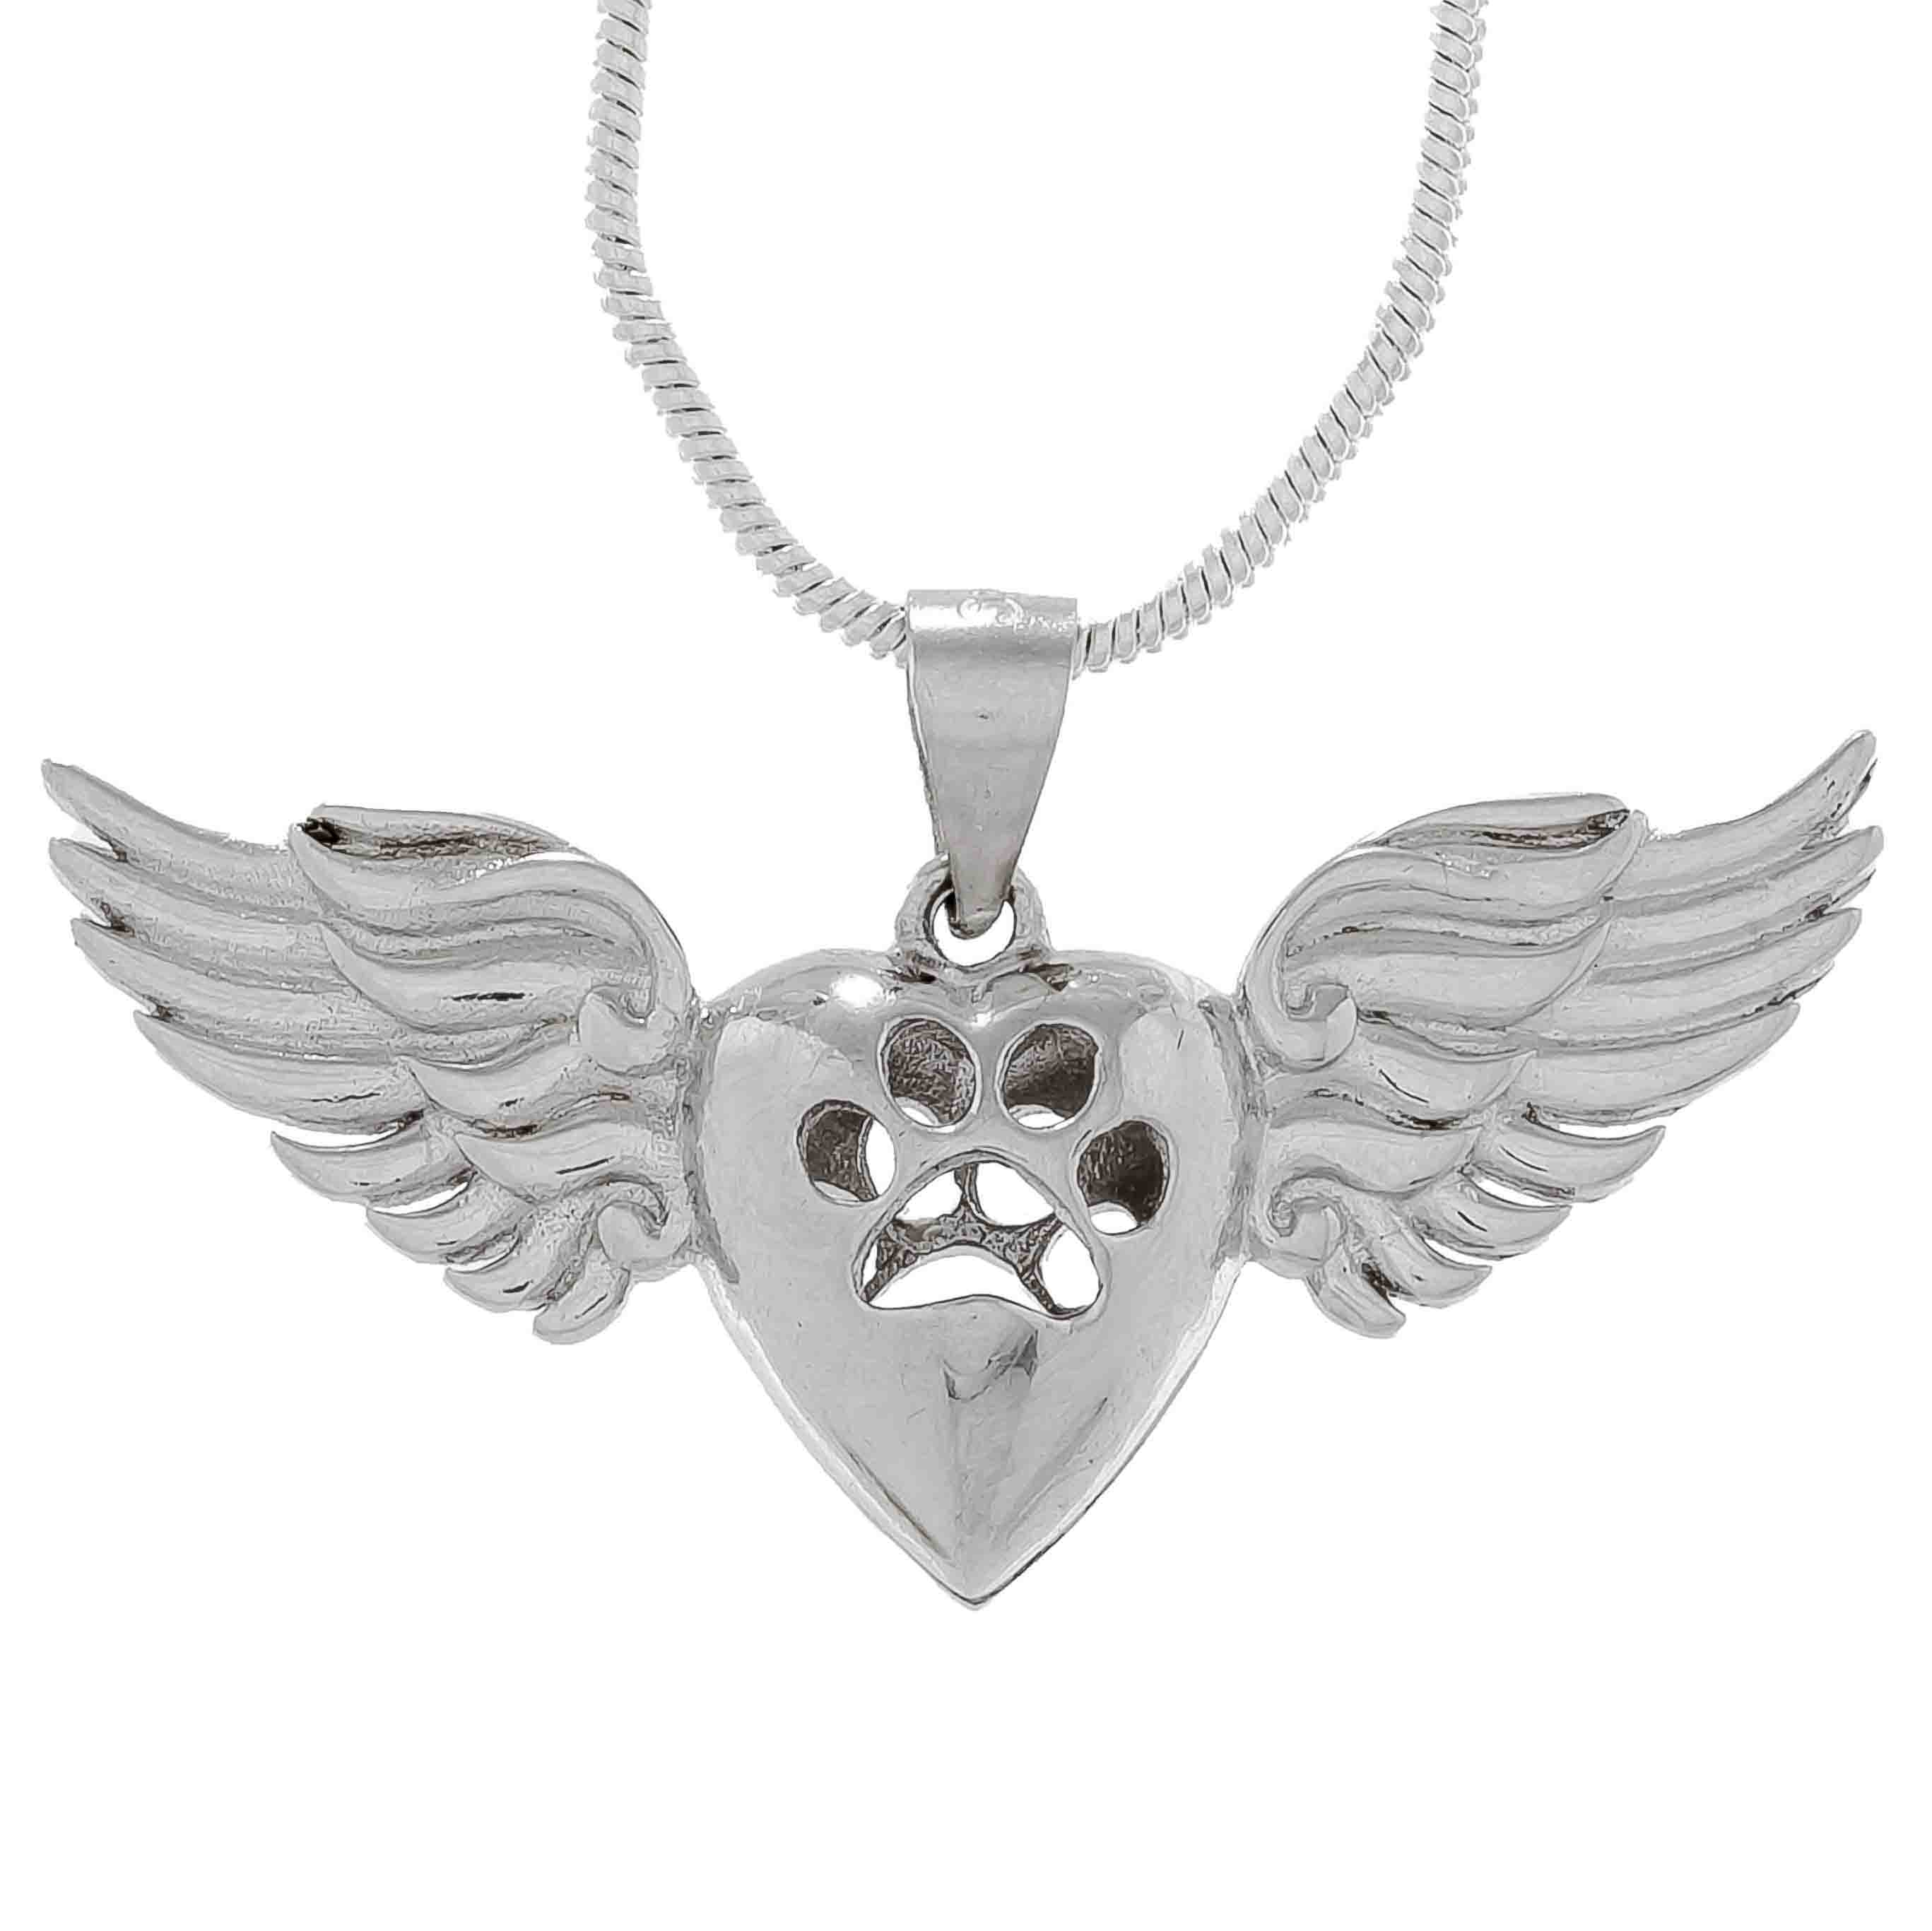 Cage Pendant 925 Sterling Silver - Dog Paw Heart Wing